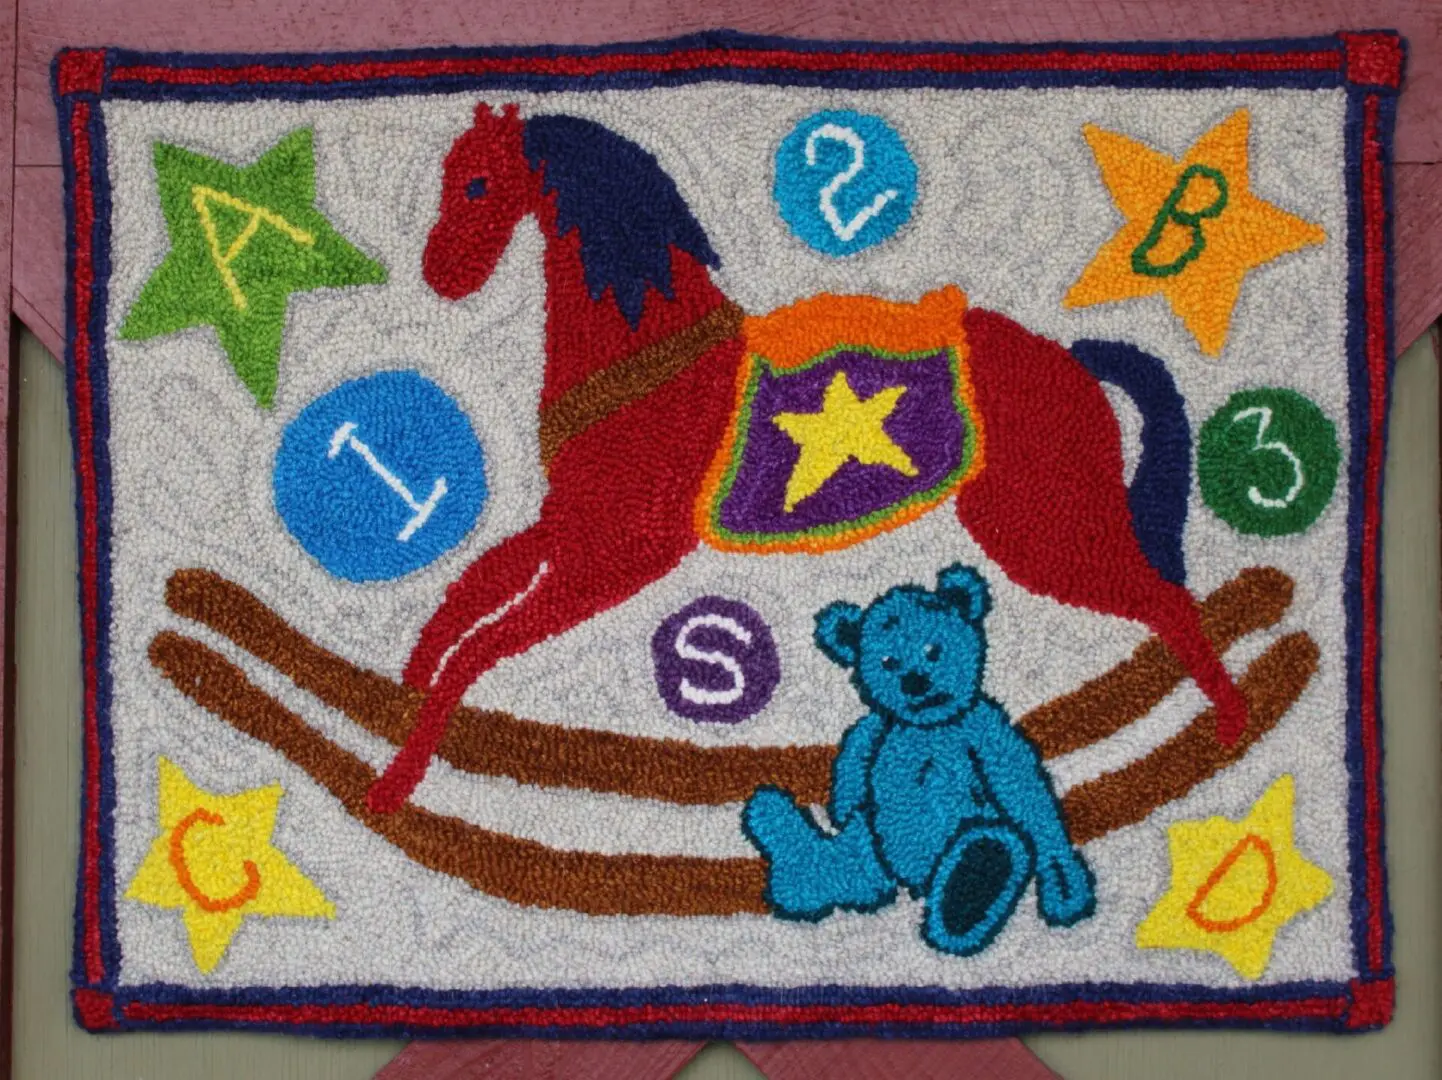 A child’s rug